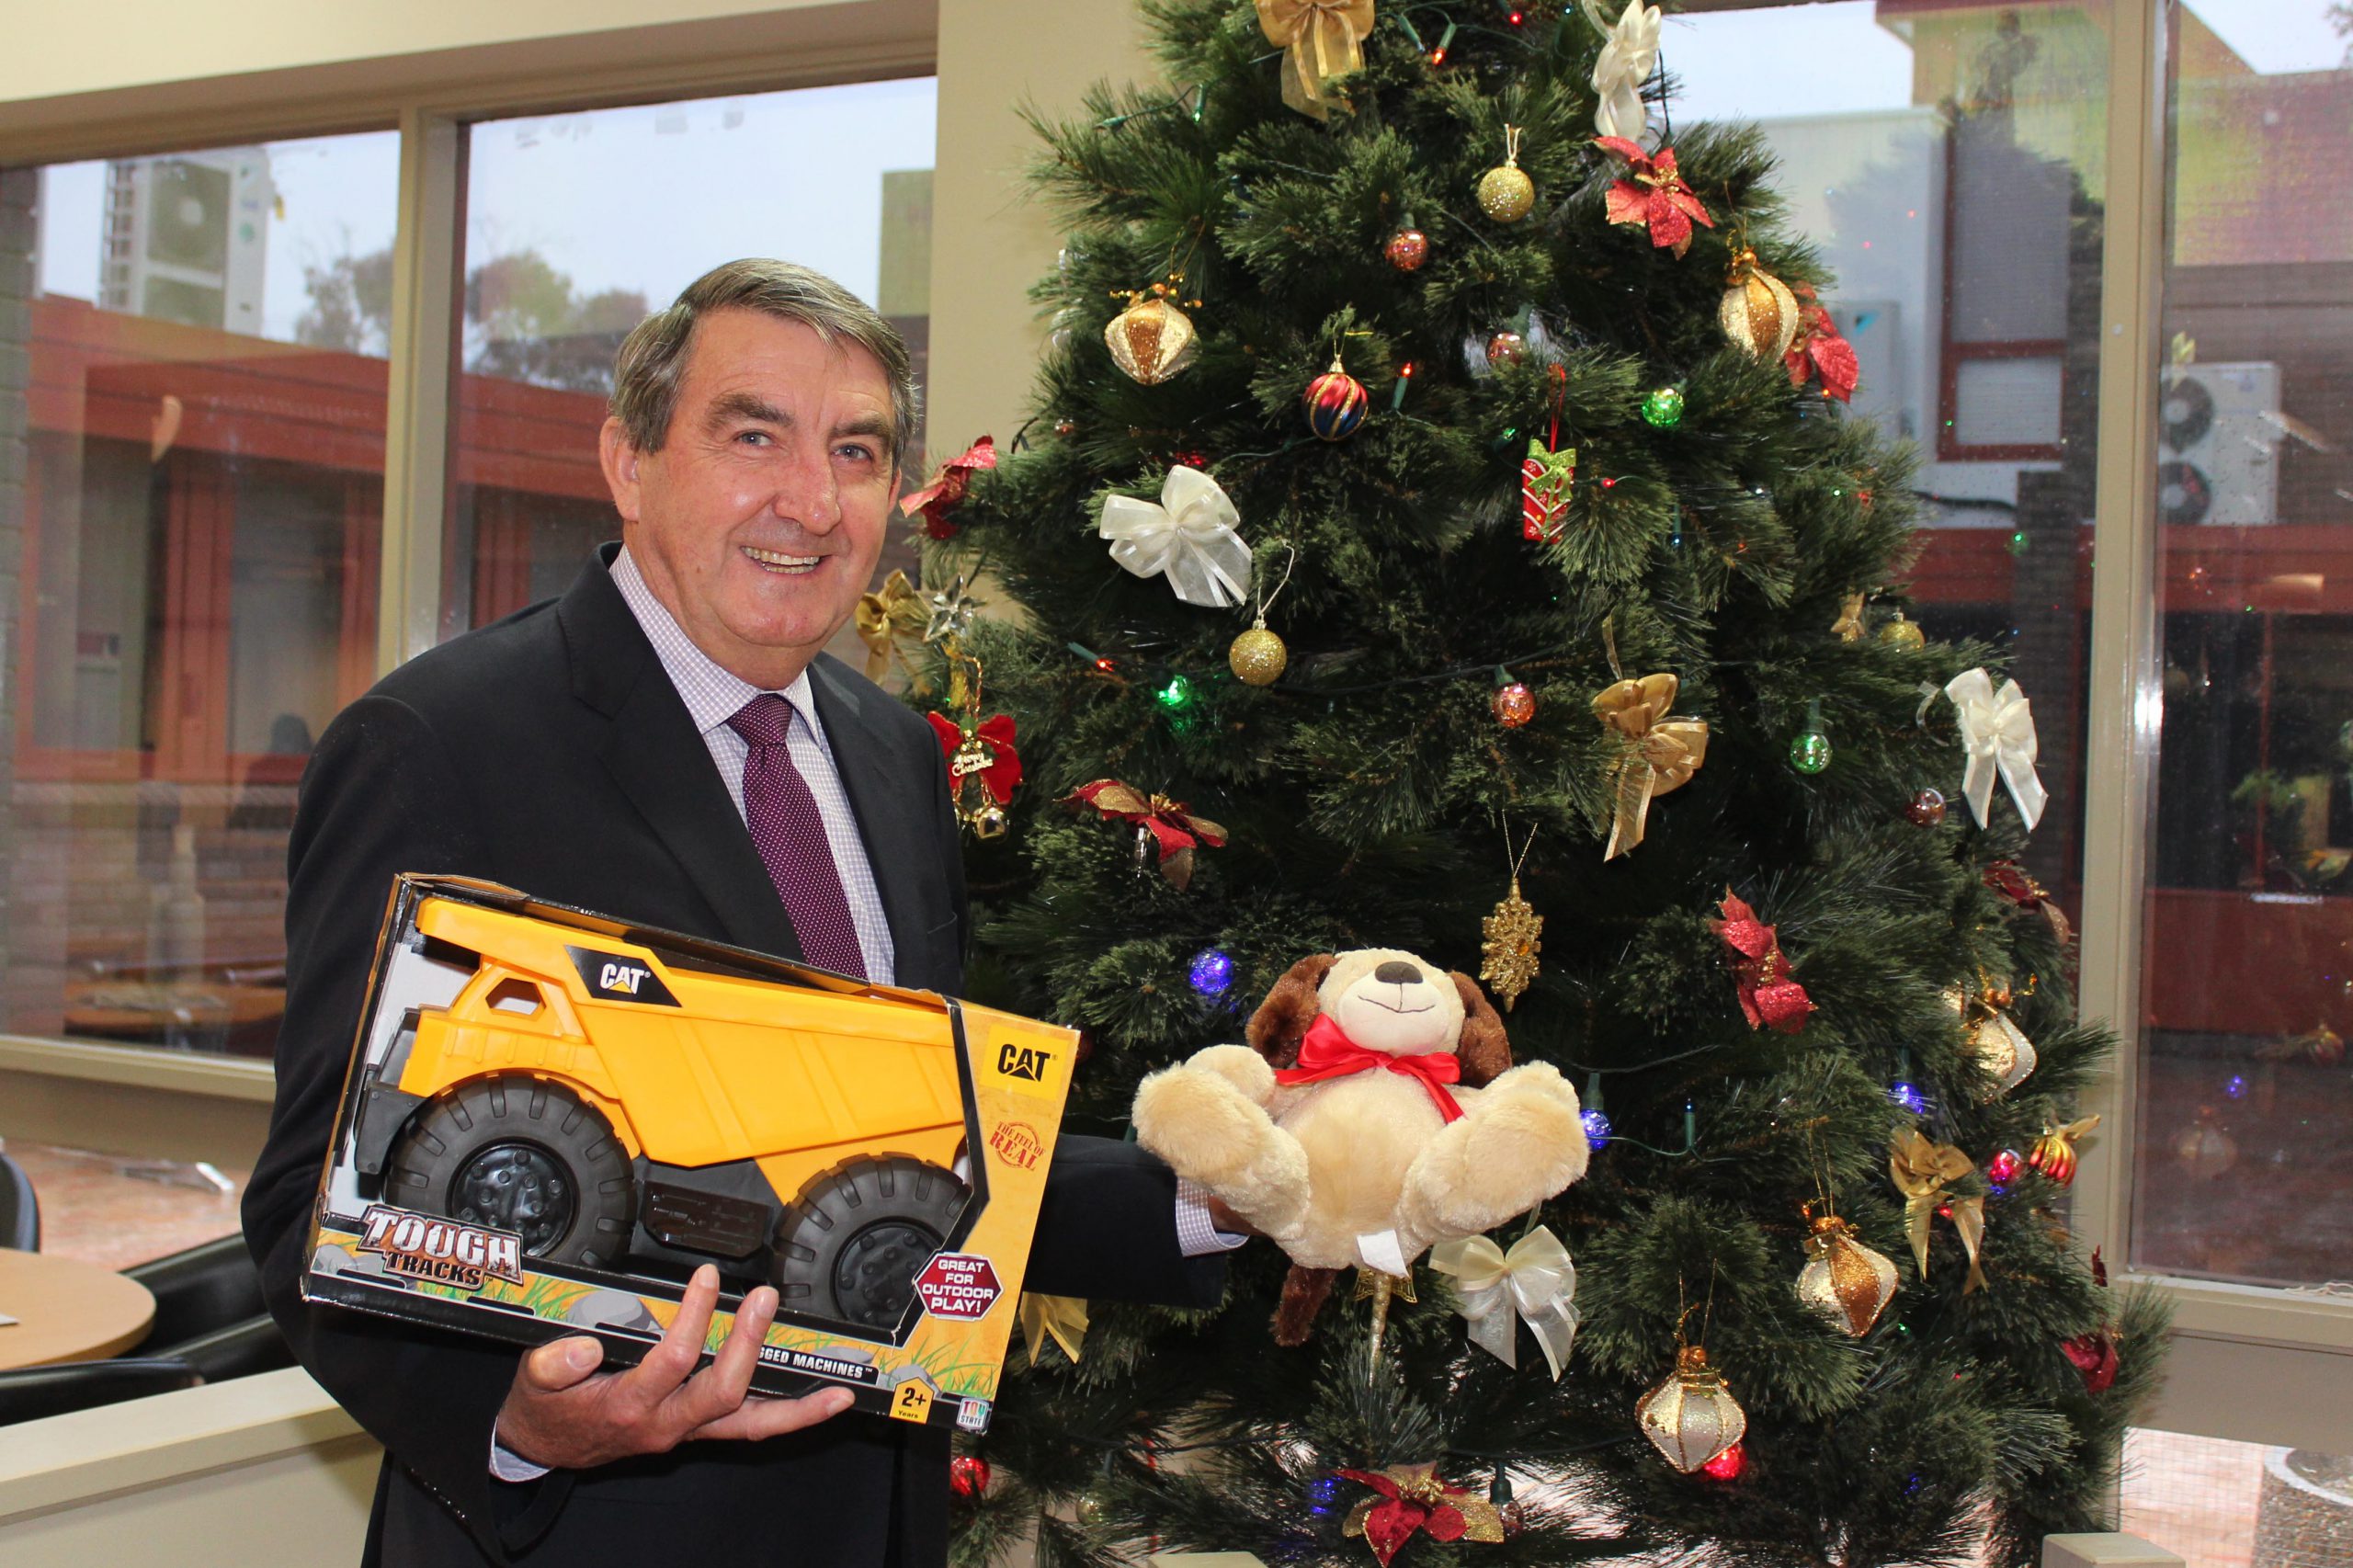 Mayor Duncan Gair holding gift in front of 2018 Christmas Giving Tree